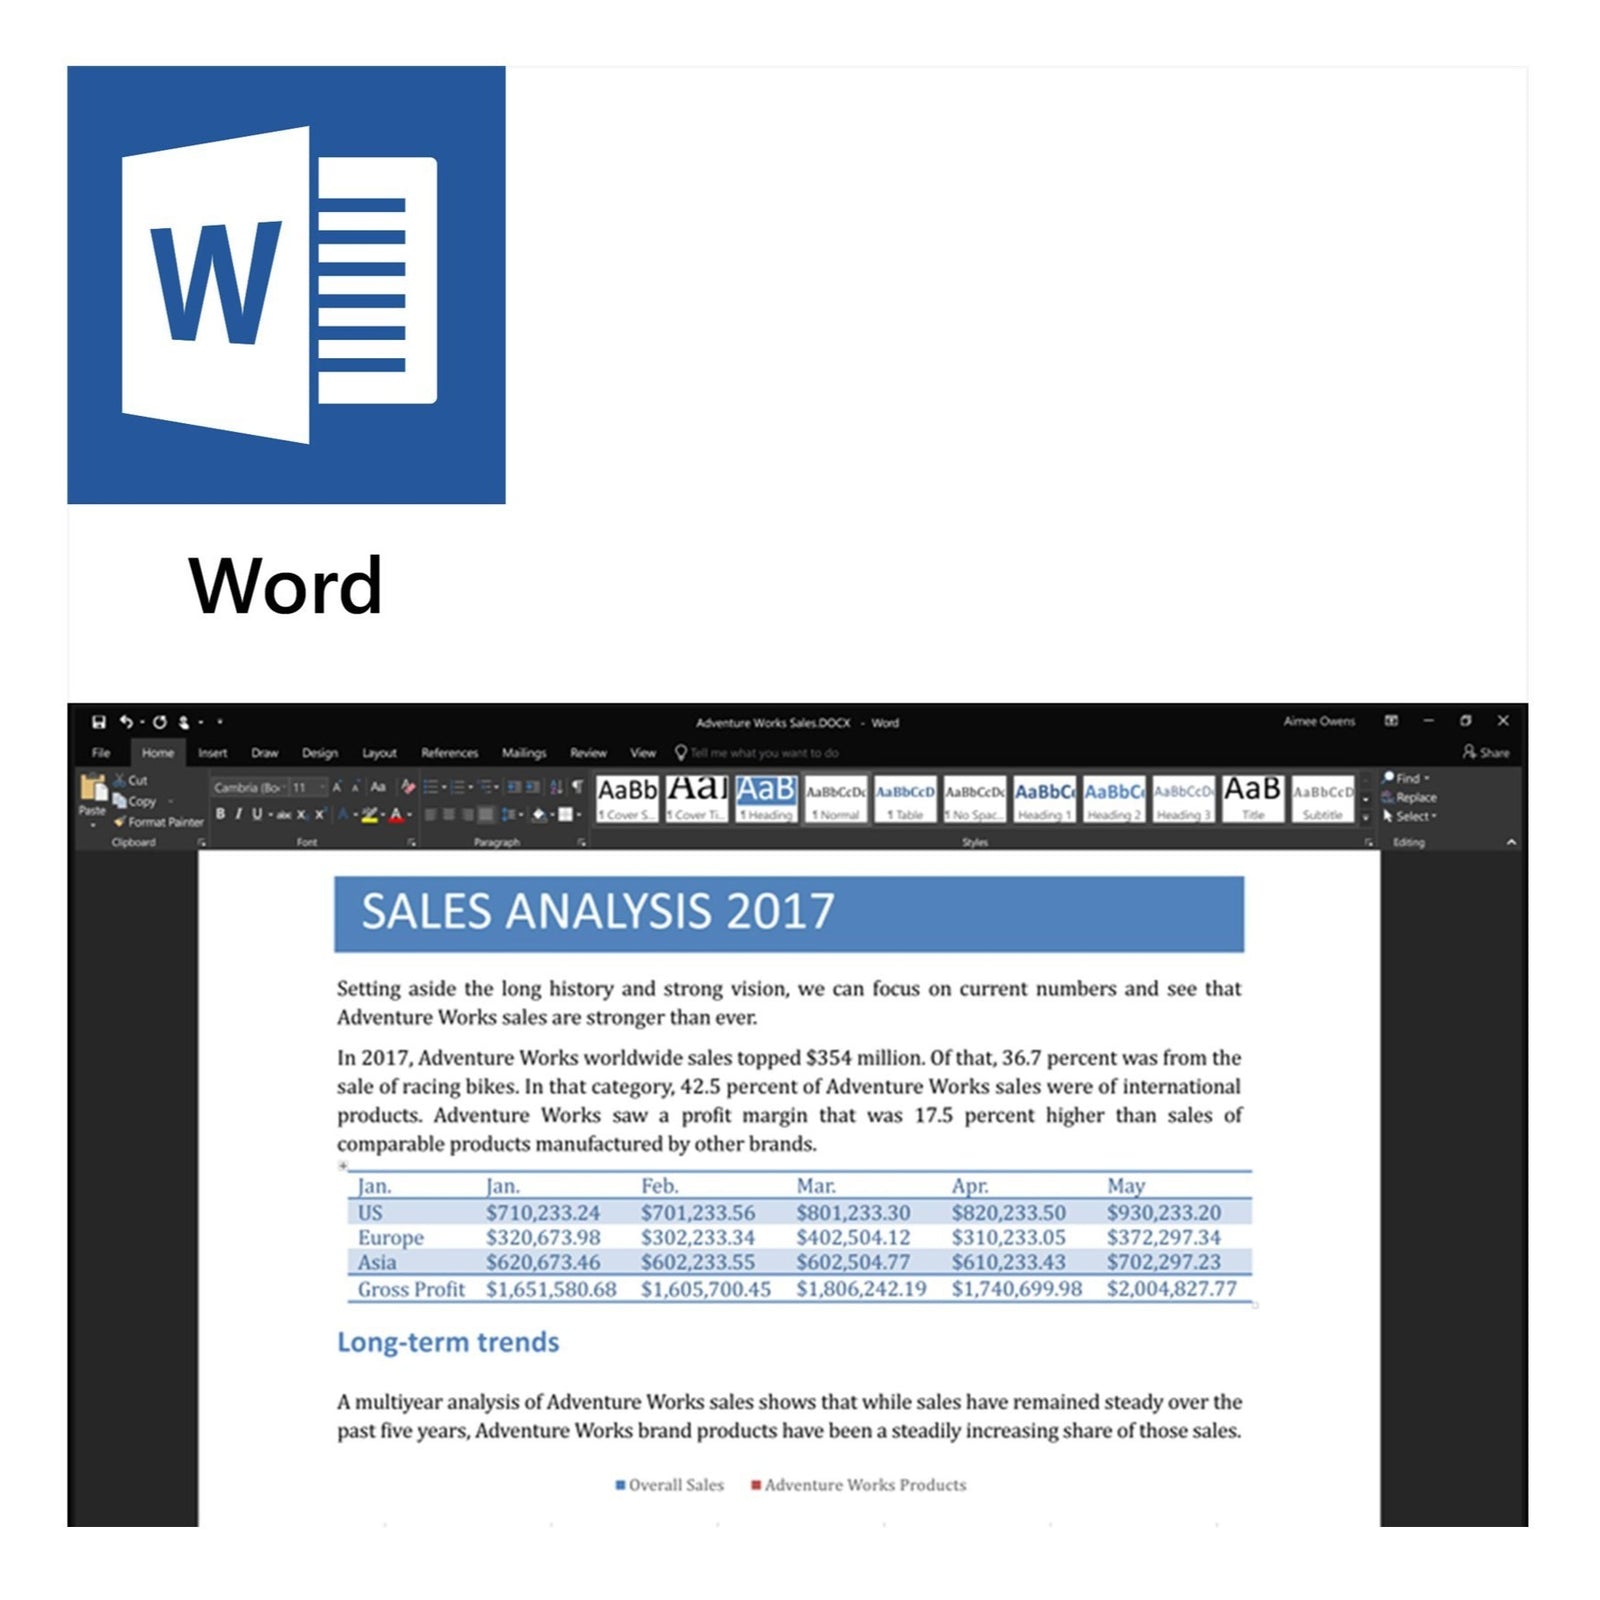 office home and student 2019 mac download